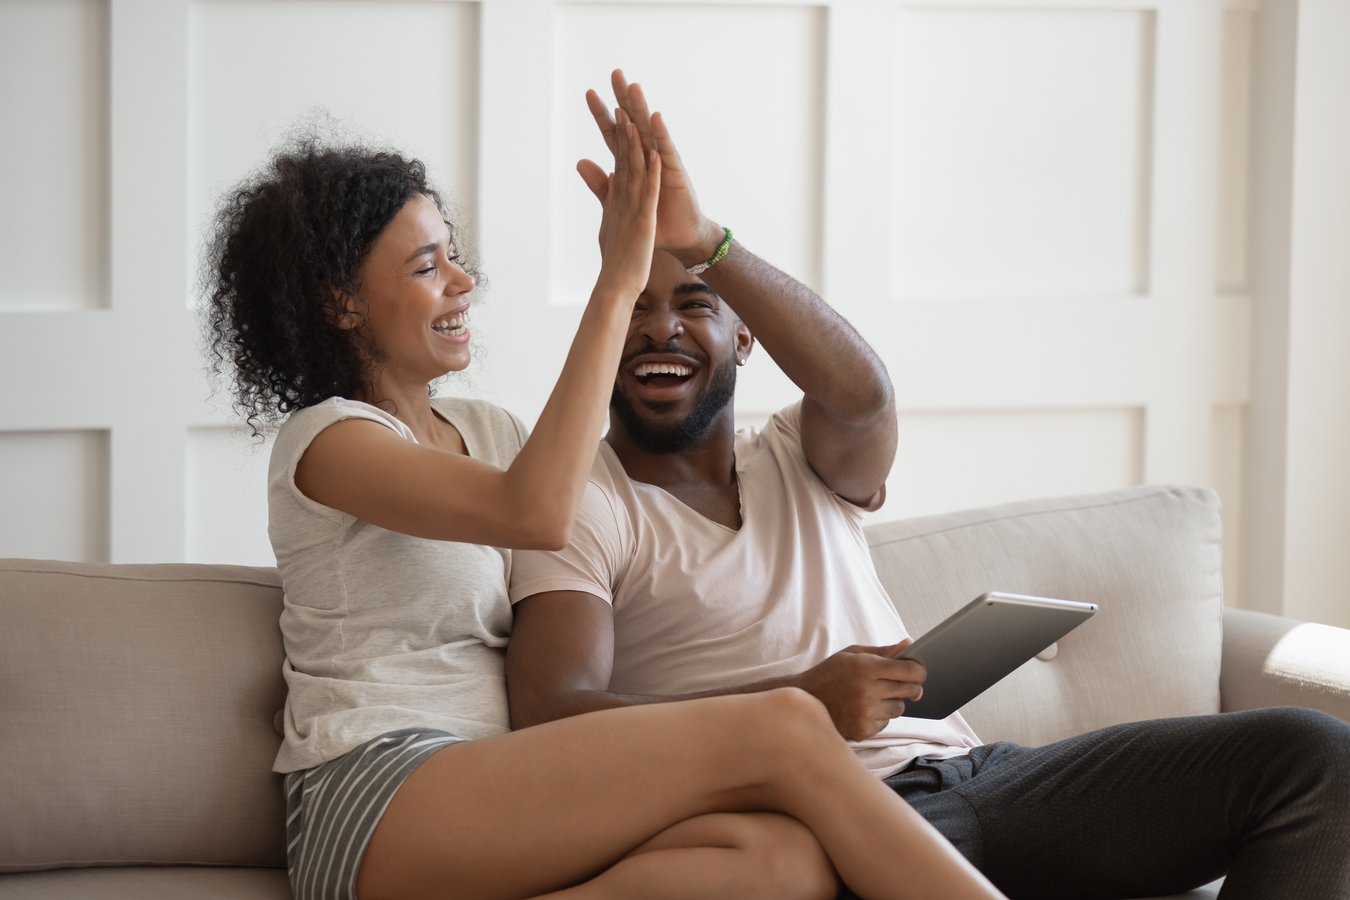 page_53_stock-photo-excited-african-wife-gives-high-five-husband-holding-tablet-computer-young-couple-celebrating-1517175491.jpg